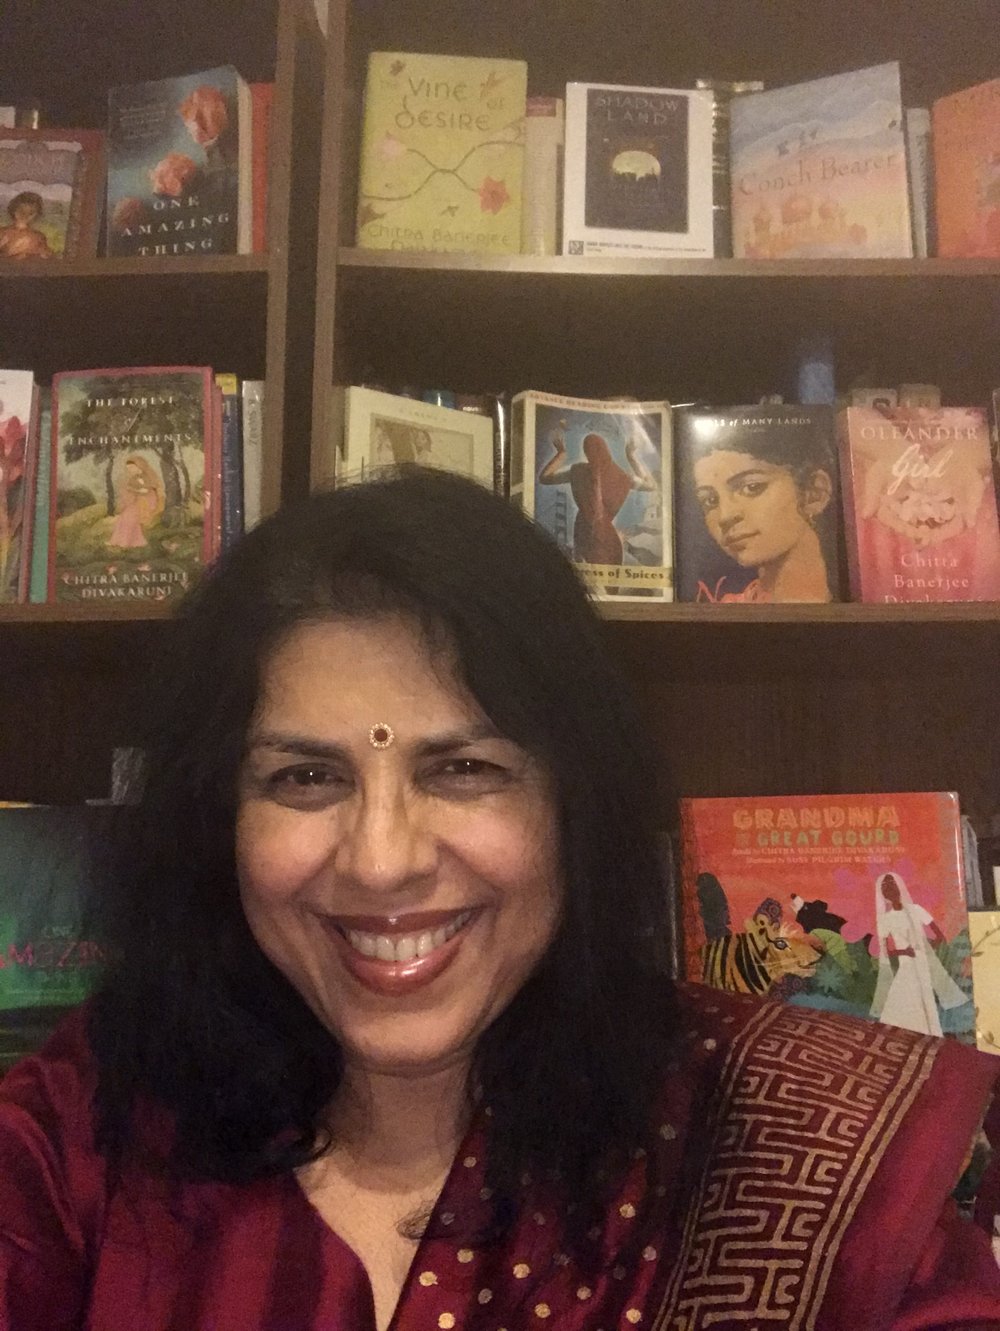 Chitra Banerjee Divakaruni, Image from her website